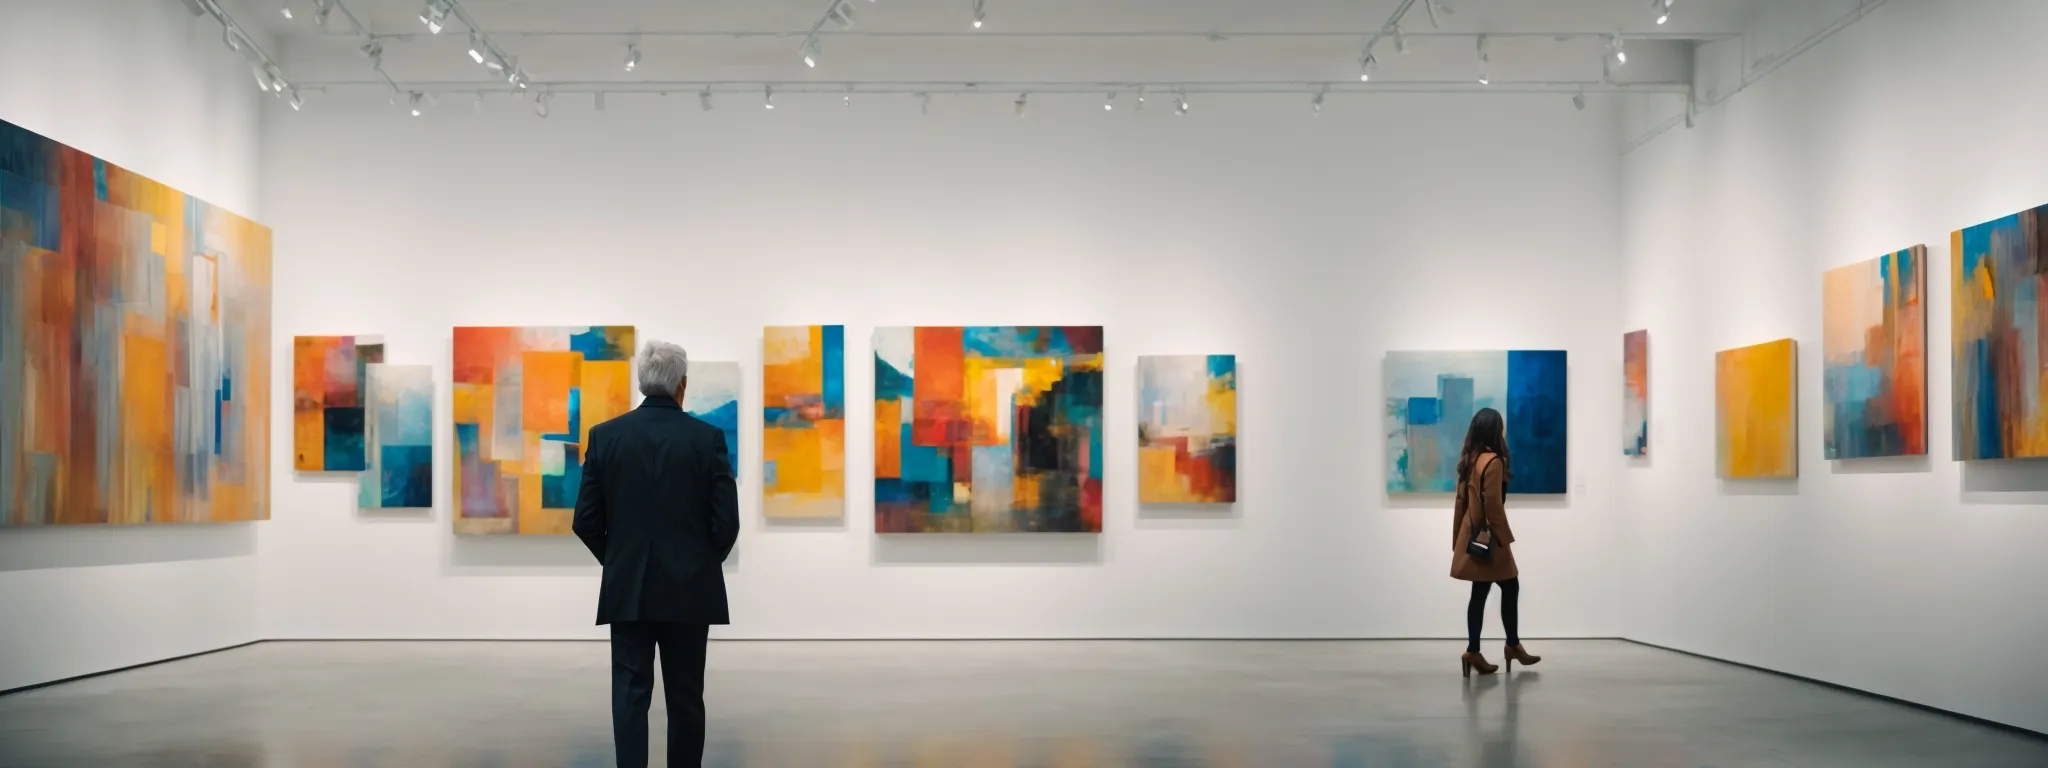 a contemplative figure strolls through a bright, modern art gallery where bold abstract paintings adorn the walls.